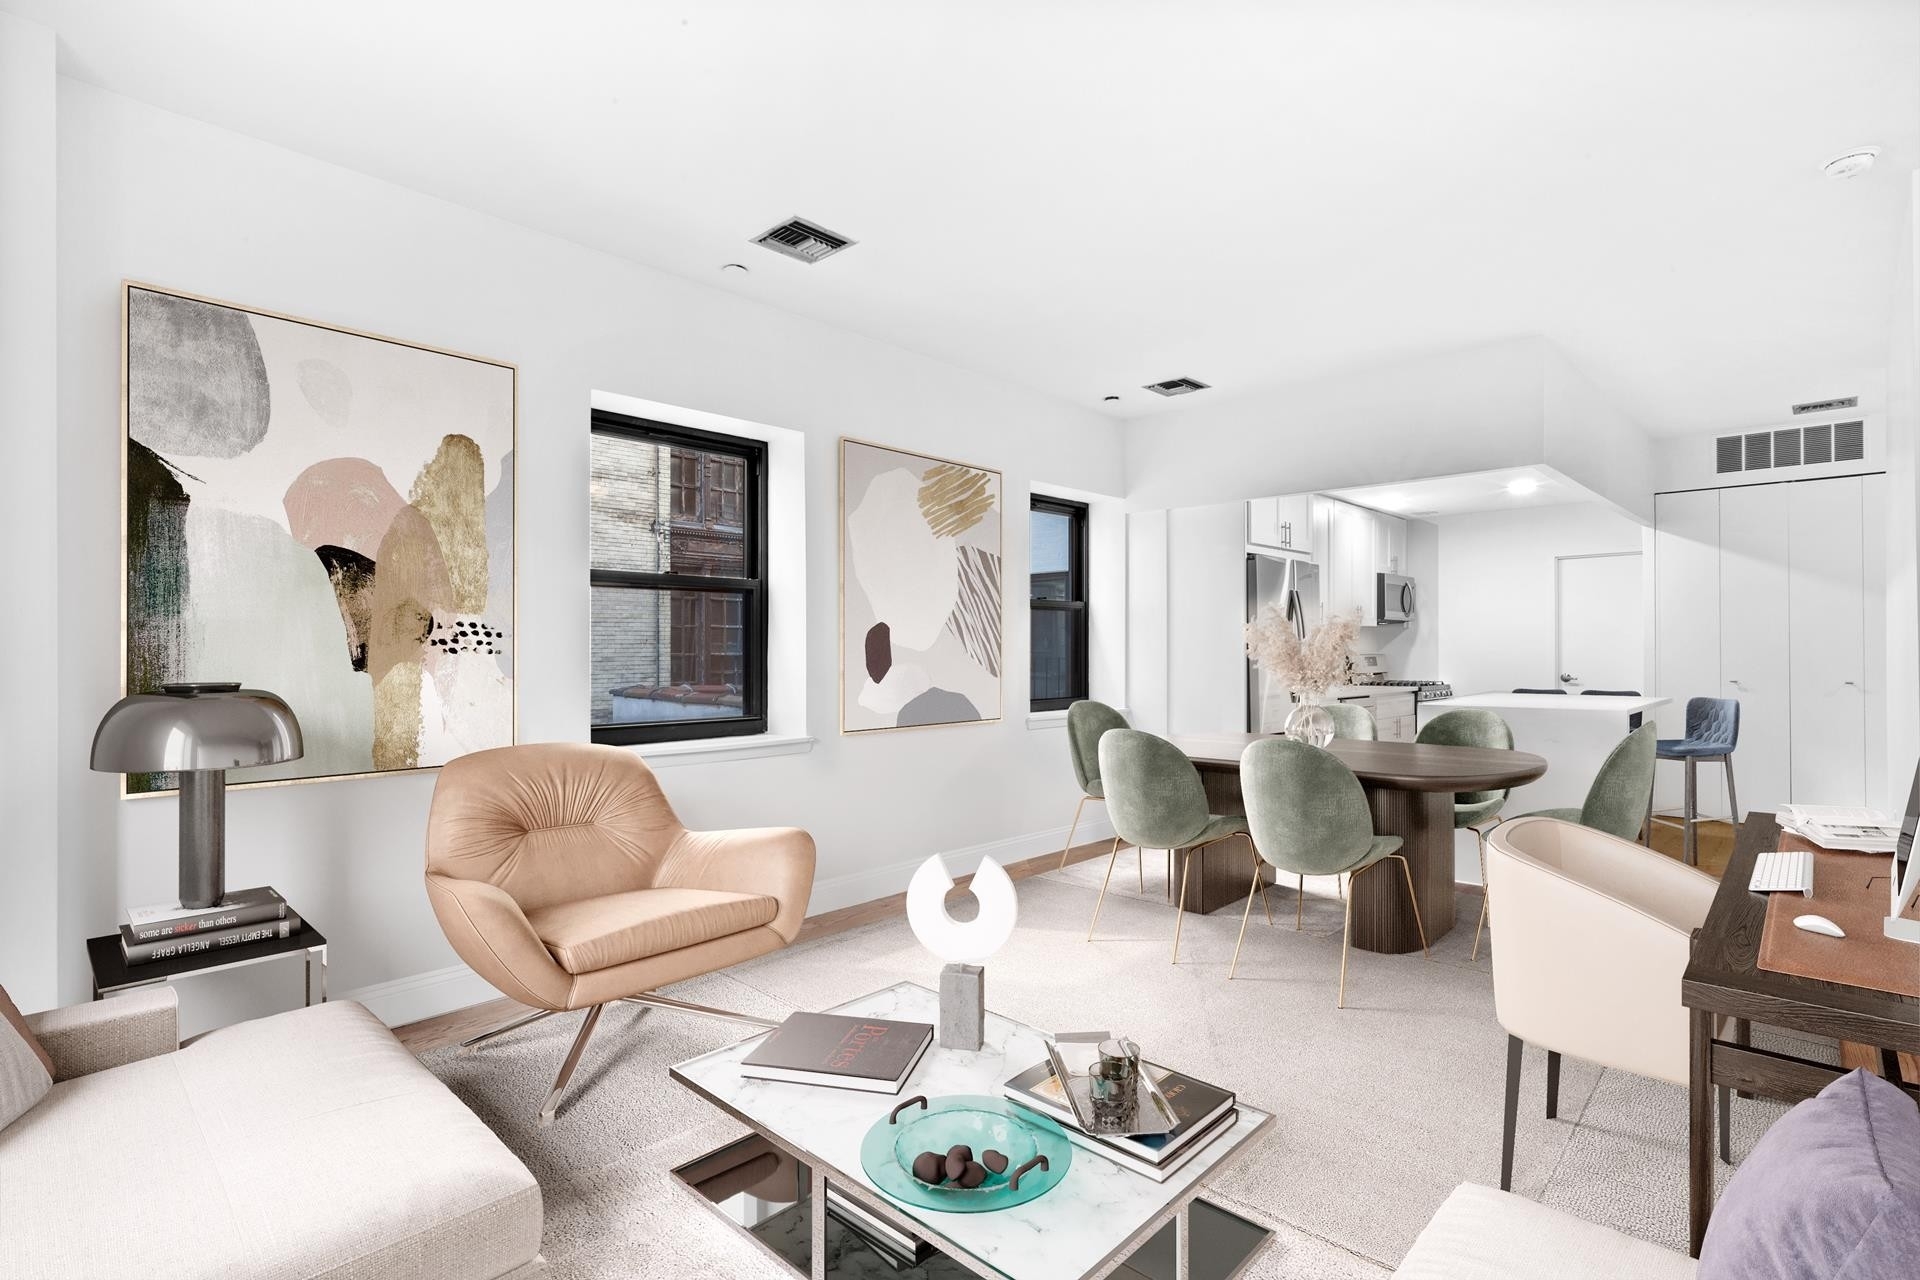 Condominium for Sale at Level Club, 253 W 73RD ST, 4N Upper West Side, New York, New York 10023